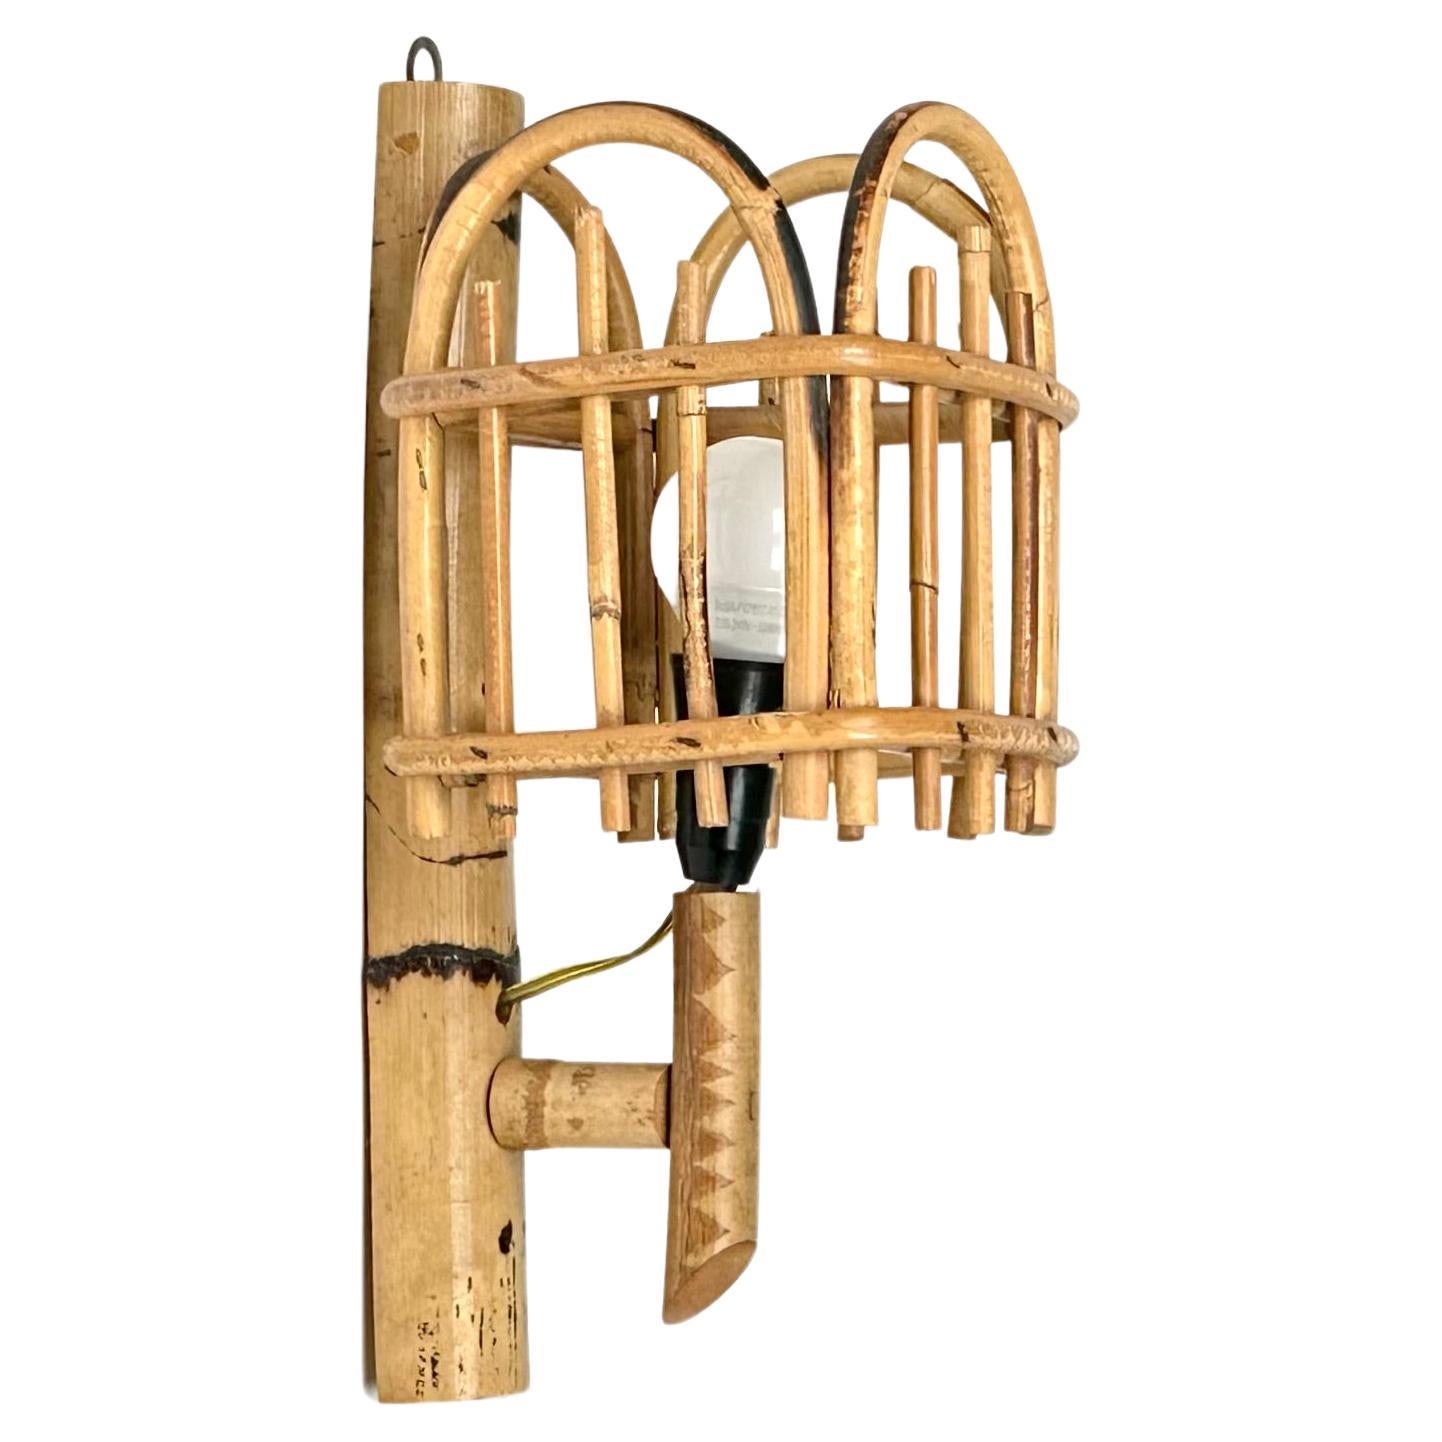 Sconce "Lantern" Wall Lamp in Rattan and Bamboo Louis Sognot Style, Italy, 1960s For Sale